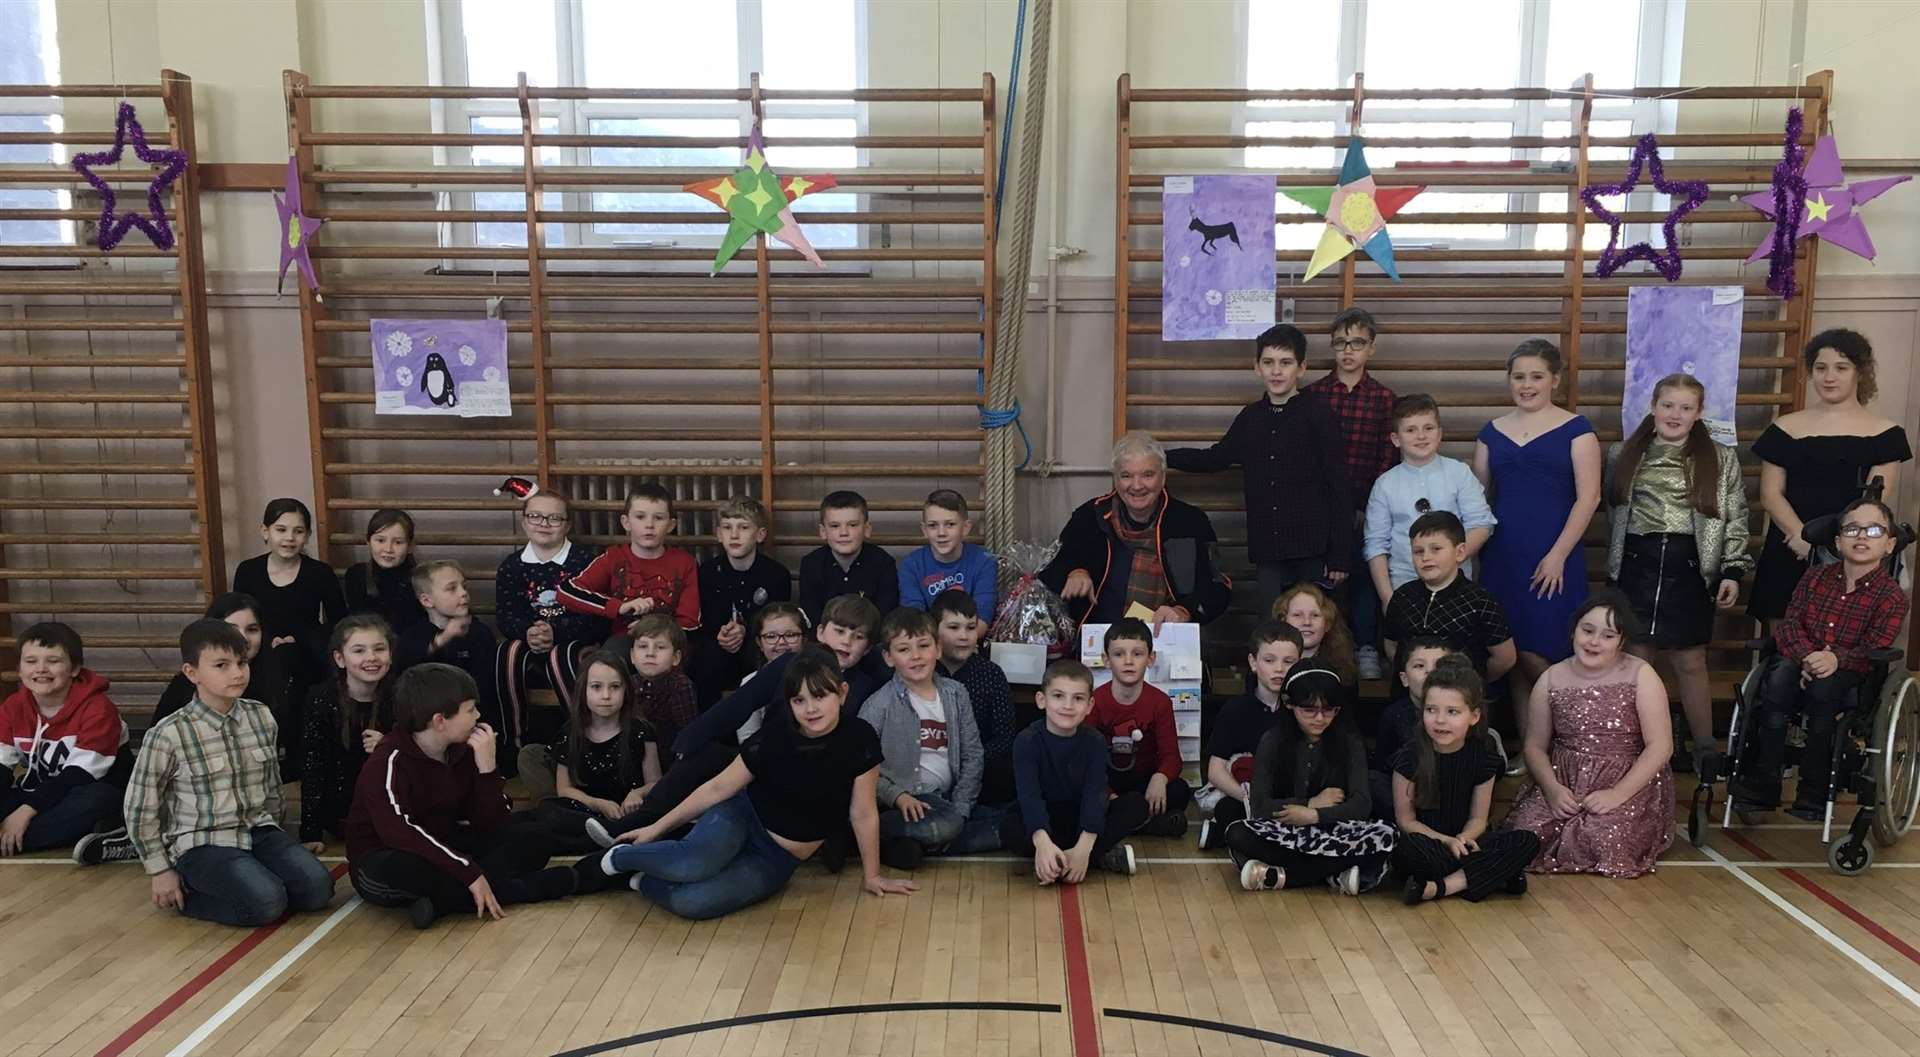 Art teacher Ian Westacott has been teaching pupils at Helmsdale Primary School for more than 20 years.